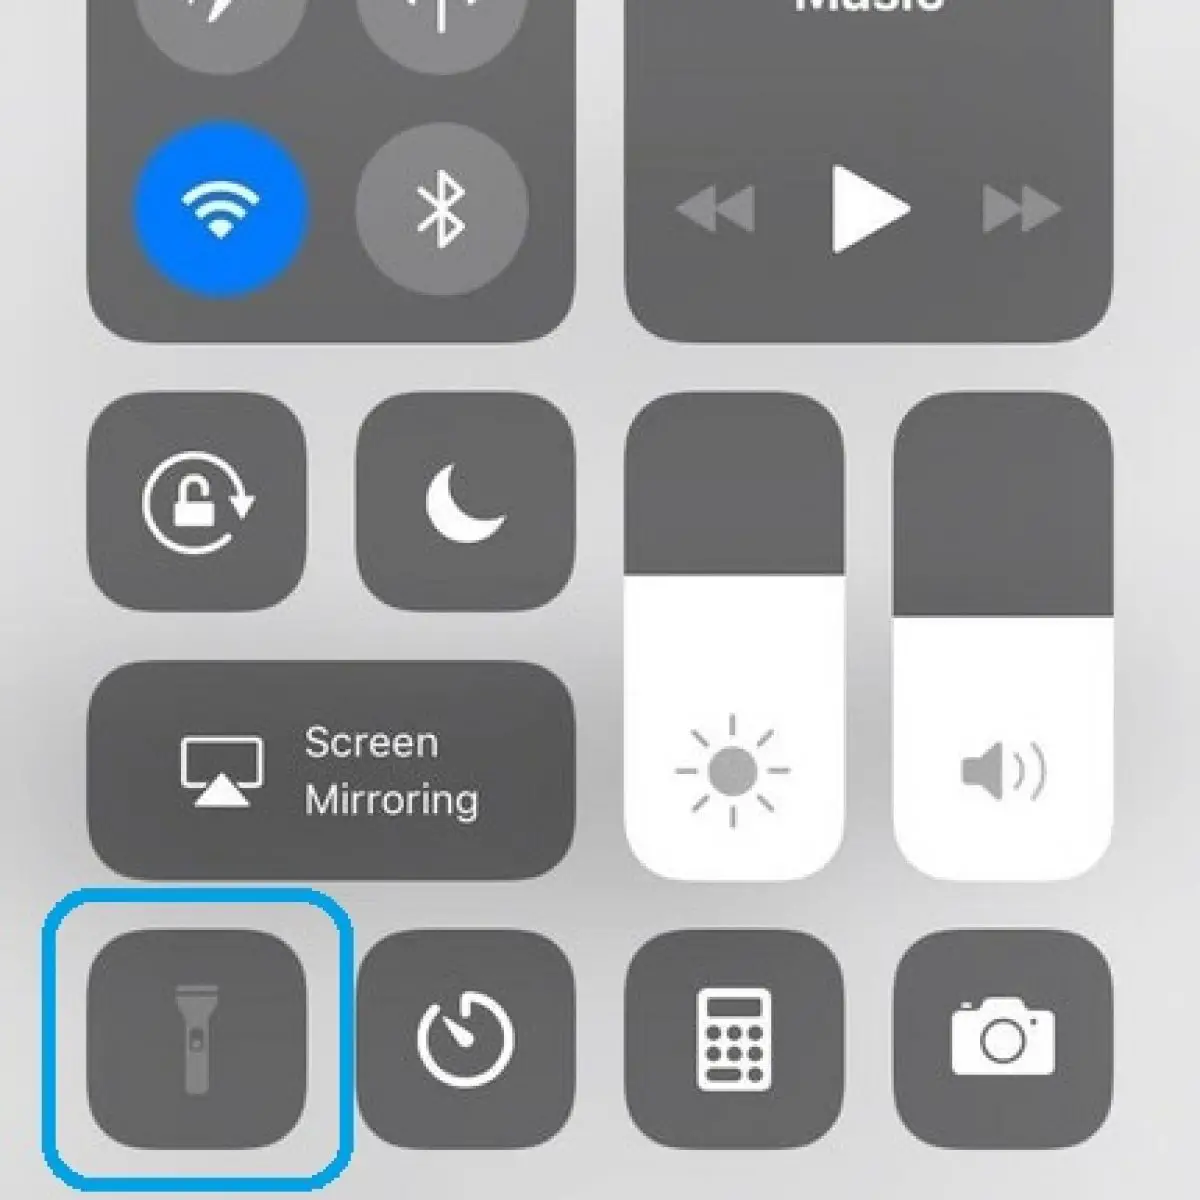 How To Fix Greyed Out Flashlight Icon In Iphone Control Center